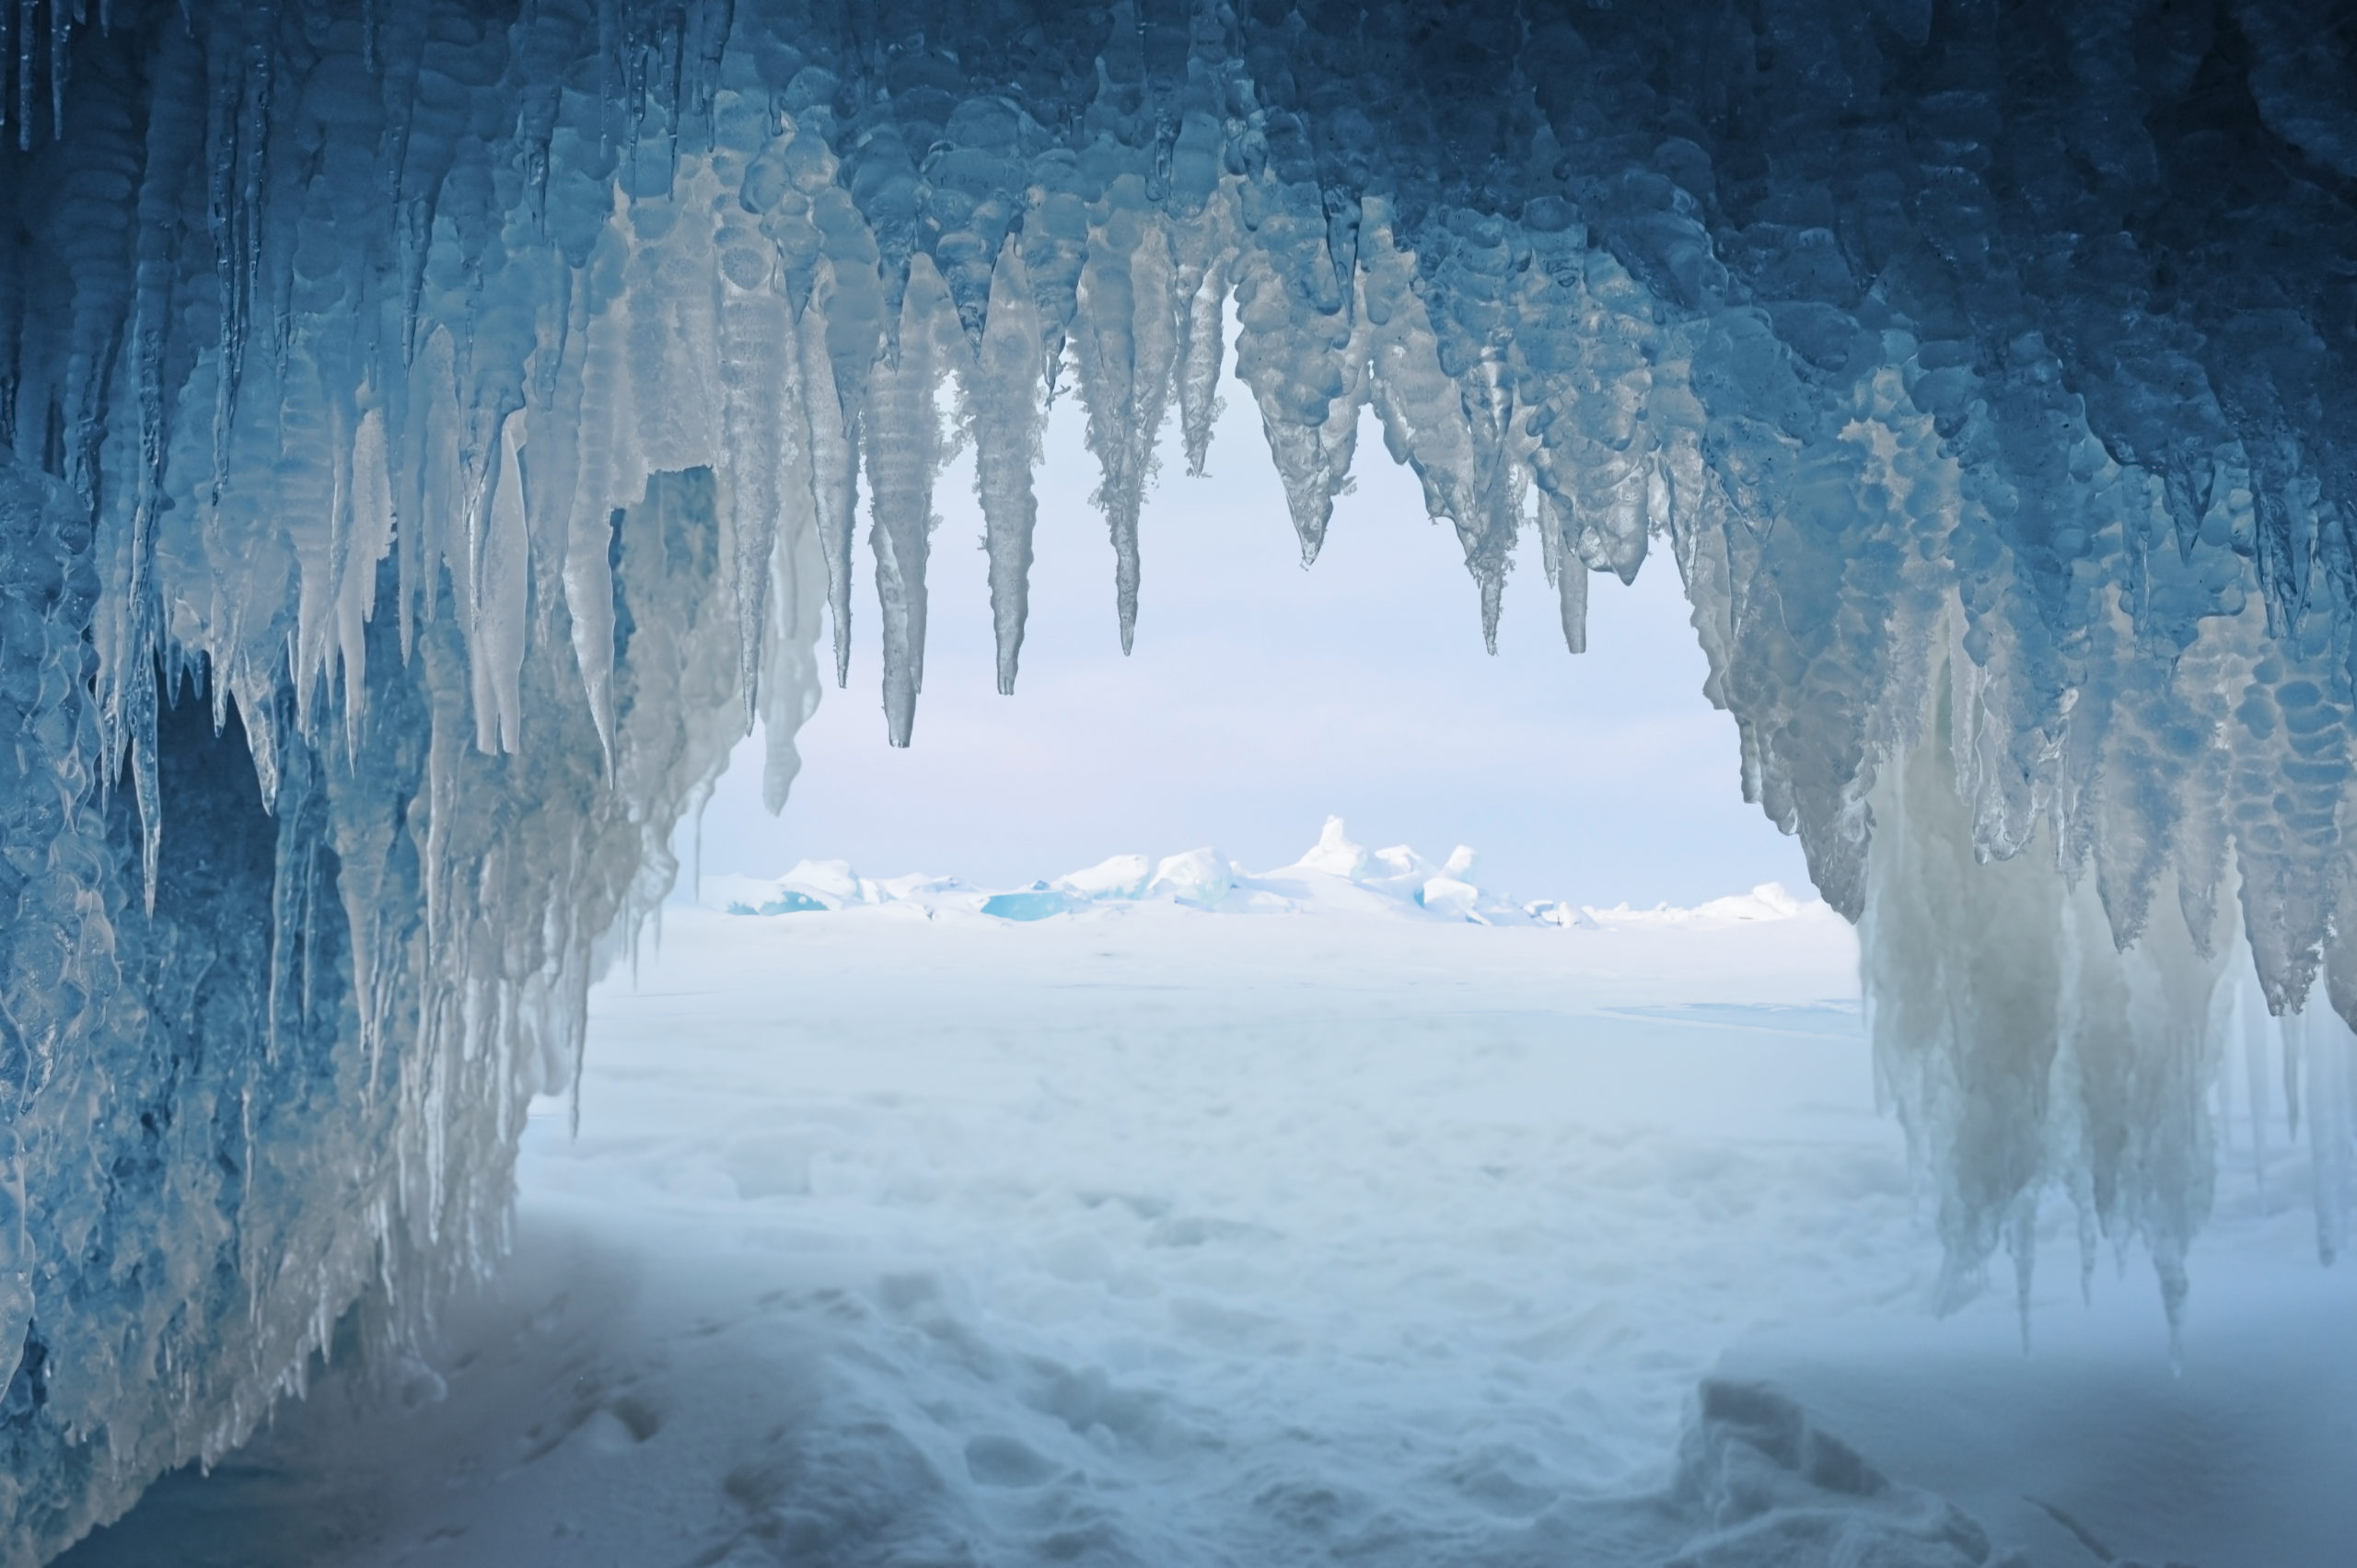 View from the grotto to the winter Baikal lake